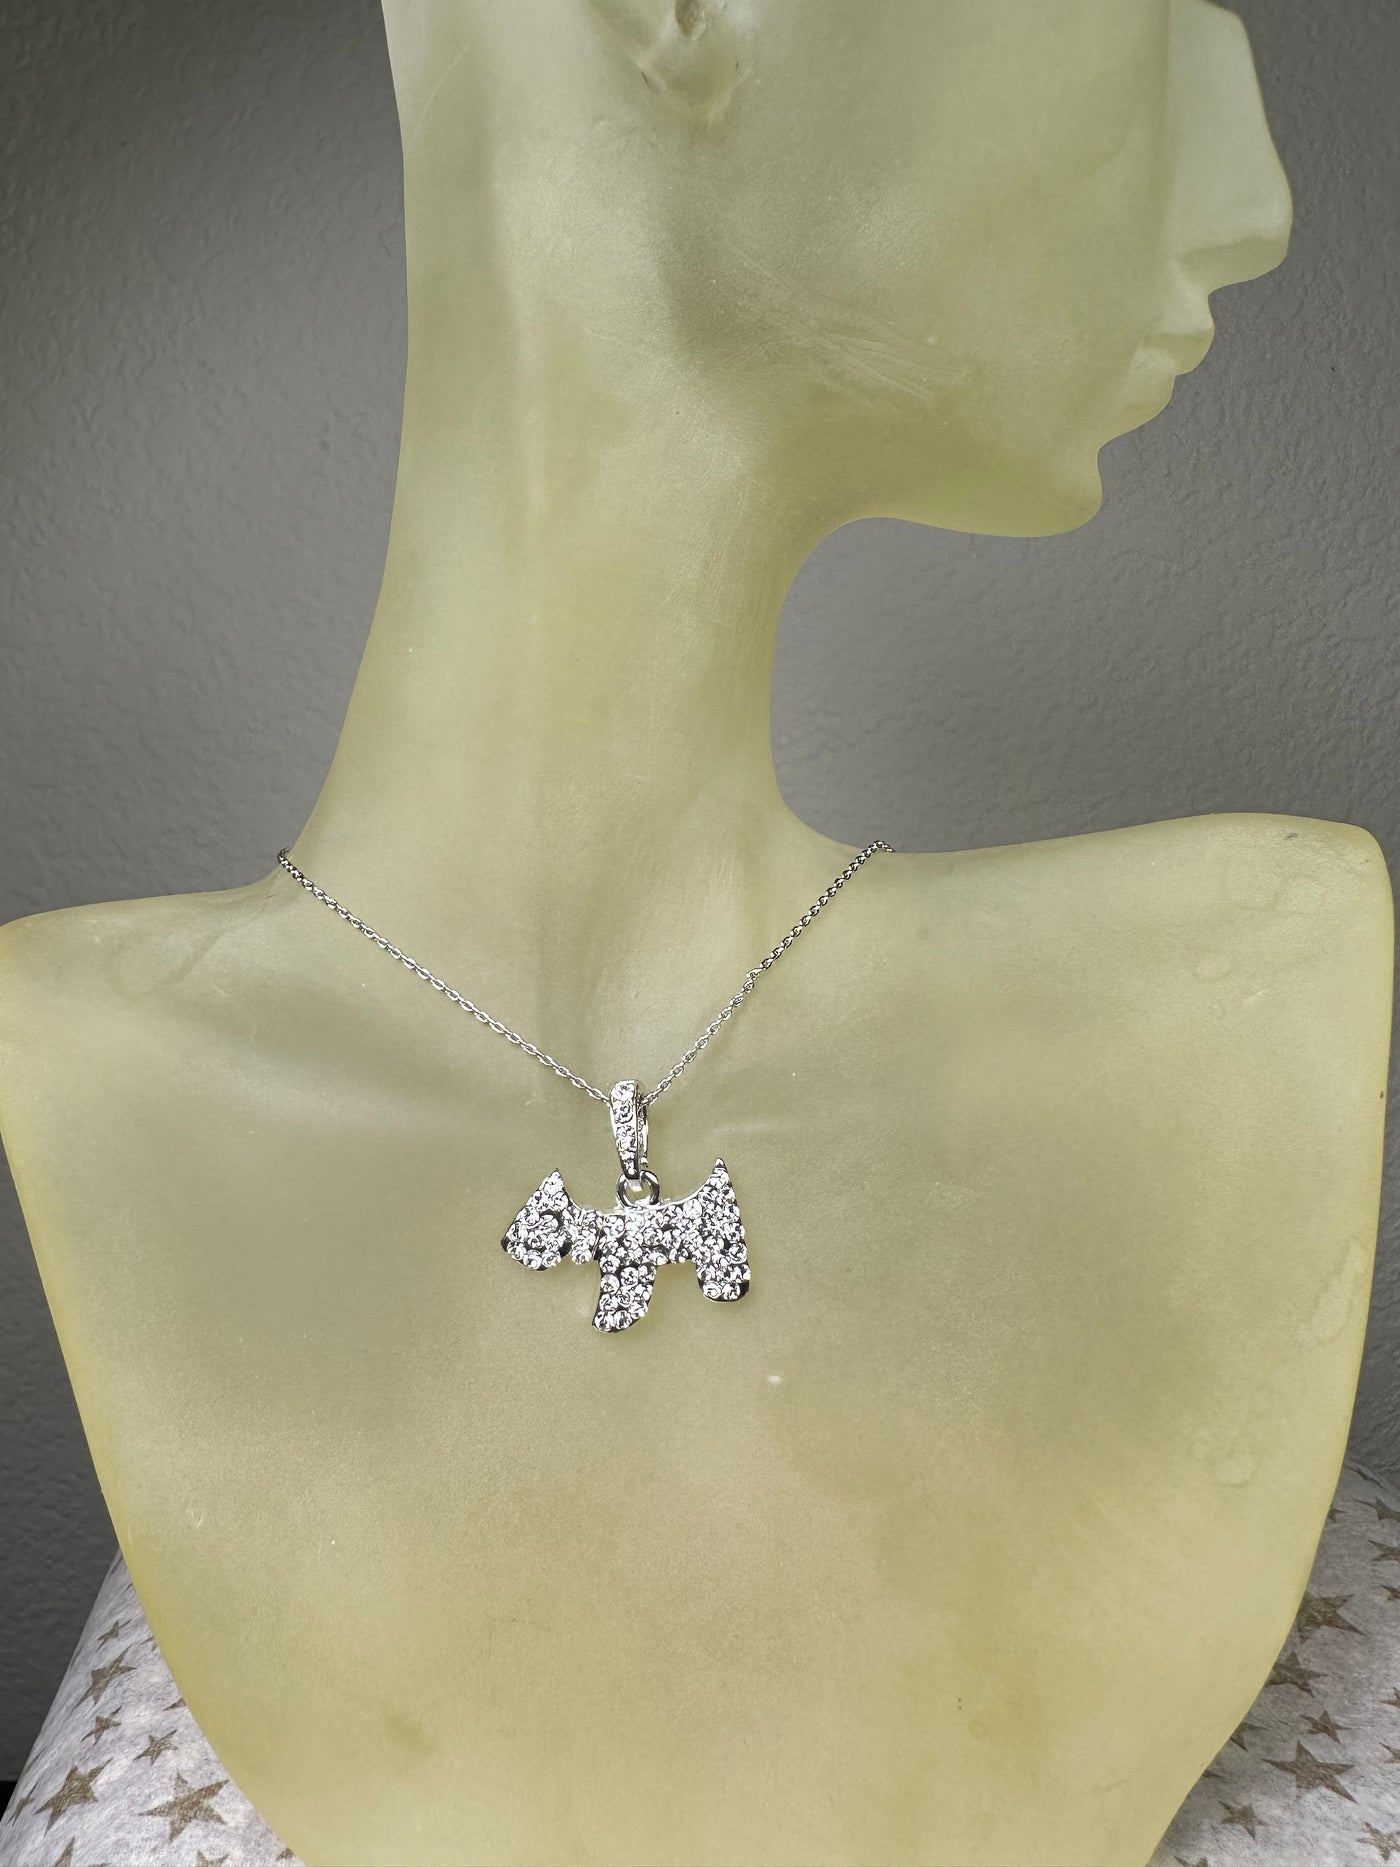 Silver Tone Crystal Dog Pendant Necklace